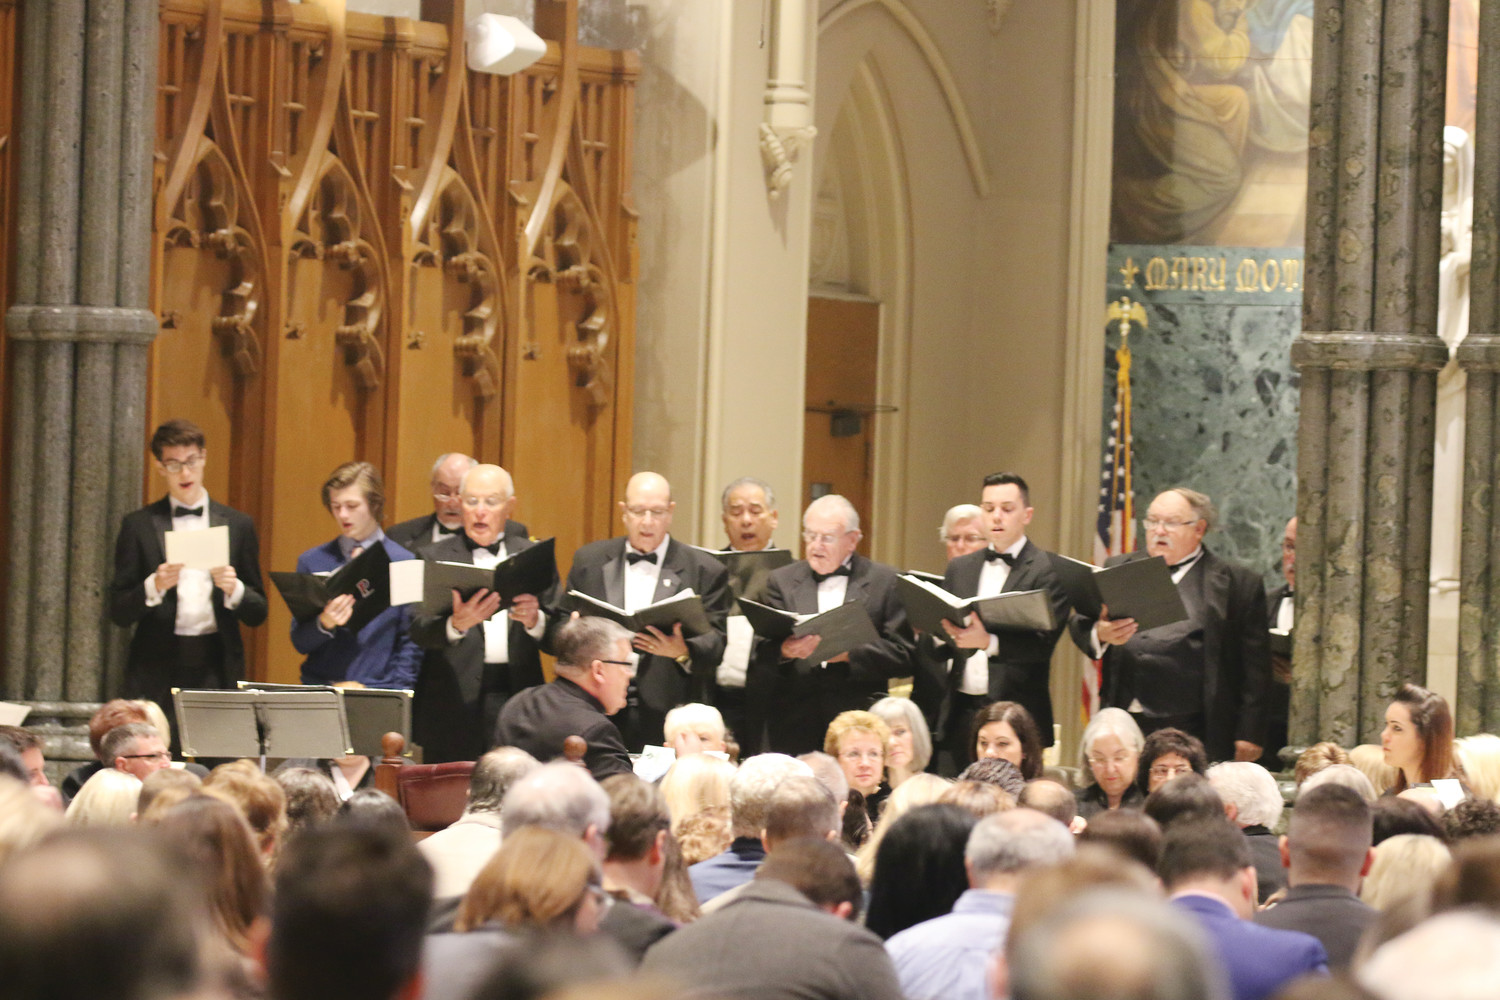 The powerful musical accompaniment by the Gregorian Concert Choir and Cathedral Organist Philip Faraone under the direction of Msgr. Anthony Mancini.